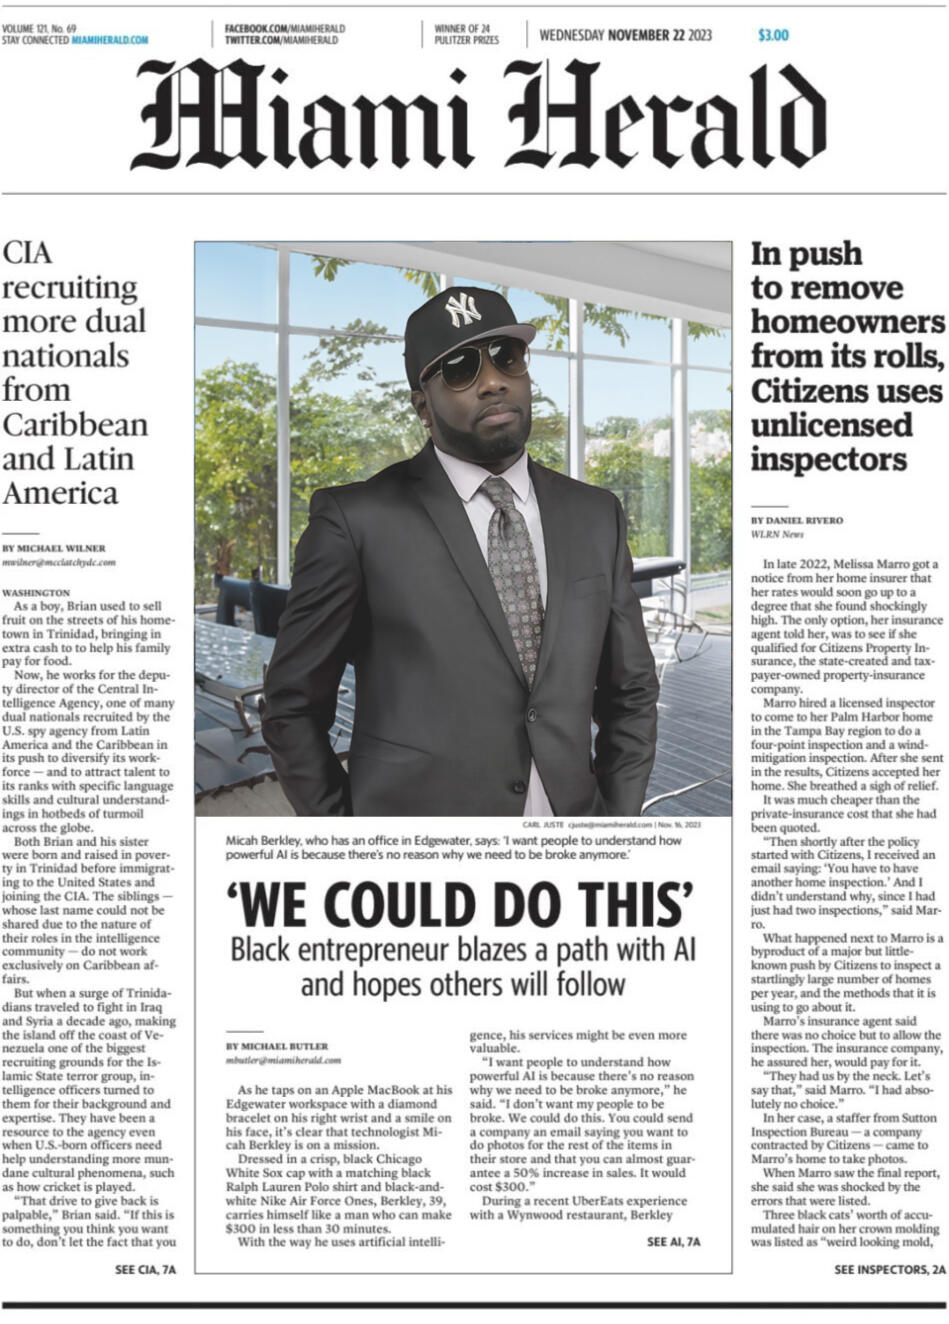 Front page of Miami Herald featuring Micah Berkley, an AI entrepreneur in a suit and cap, with a title about his AI-driven path to success.